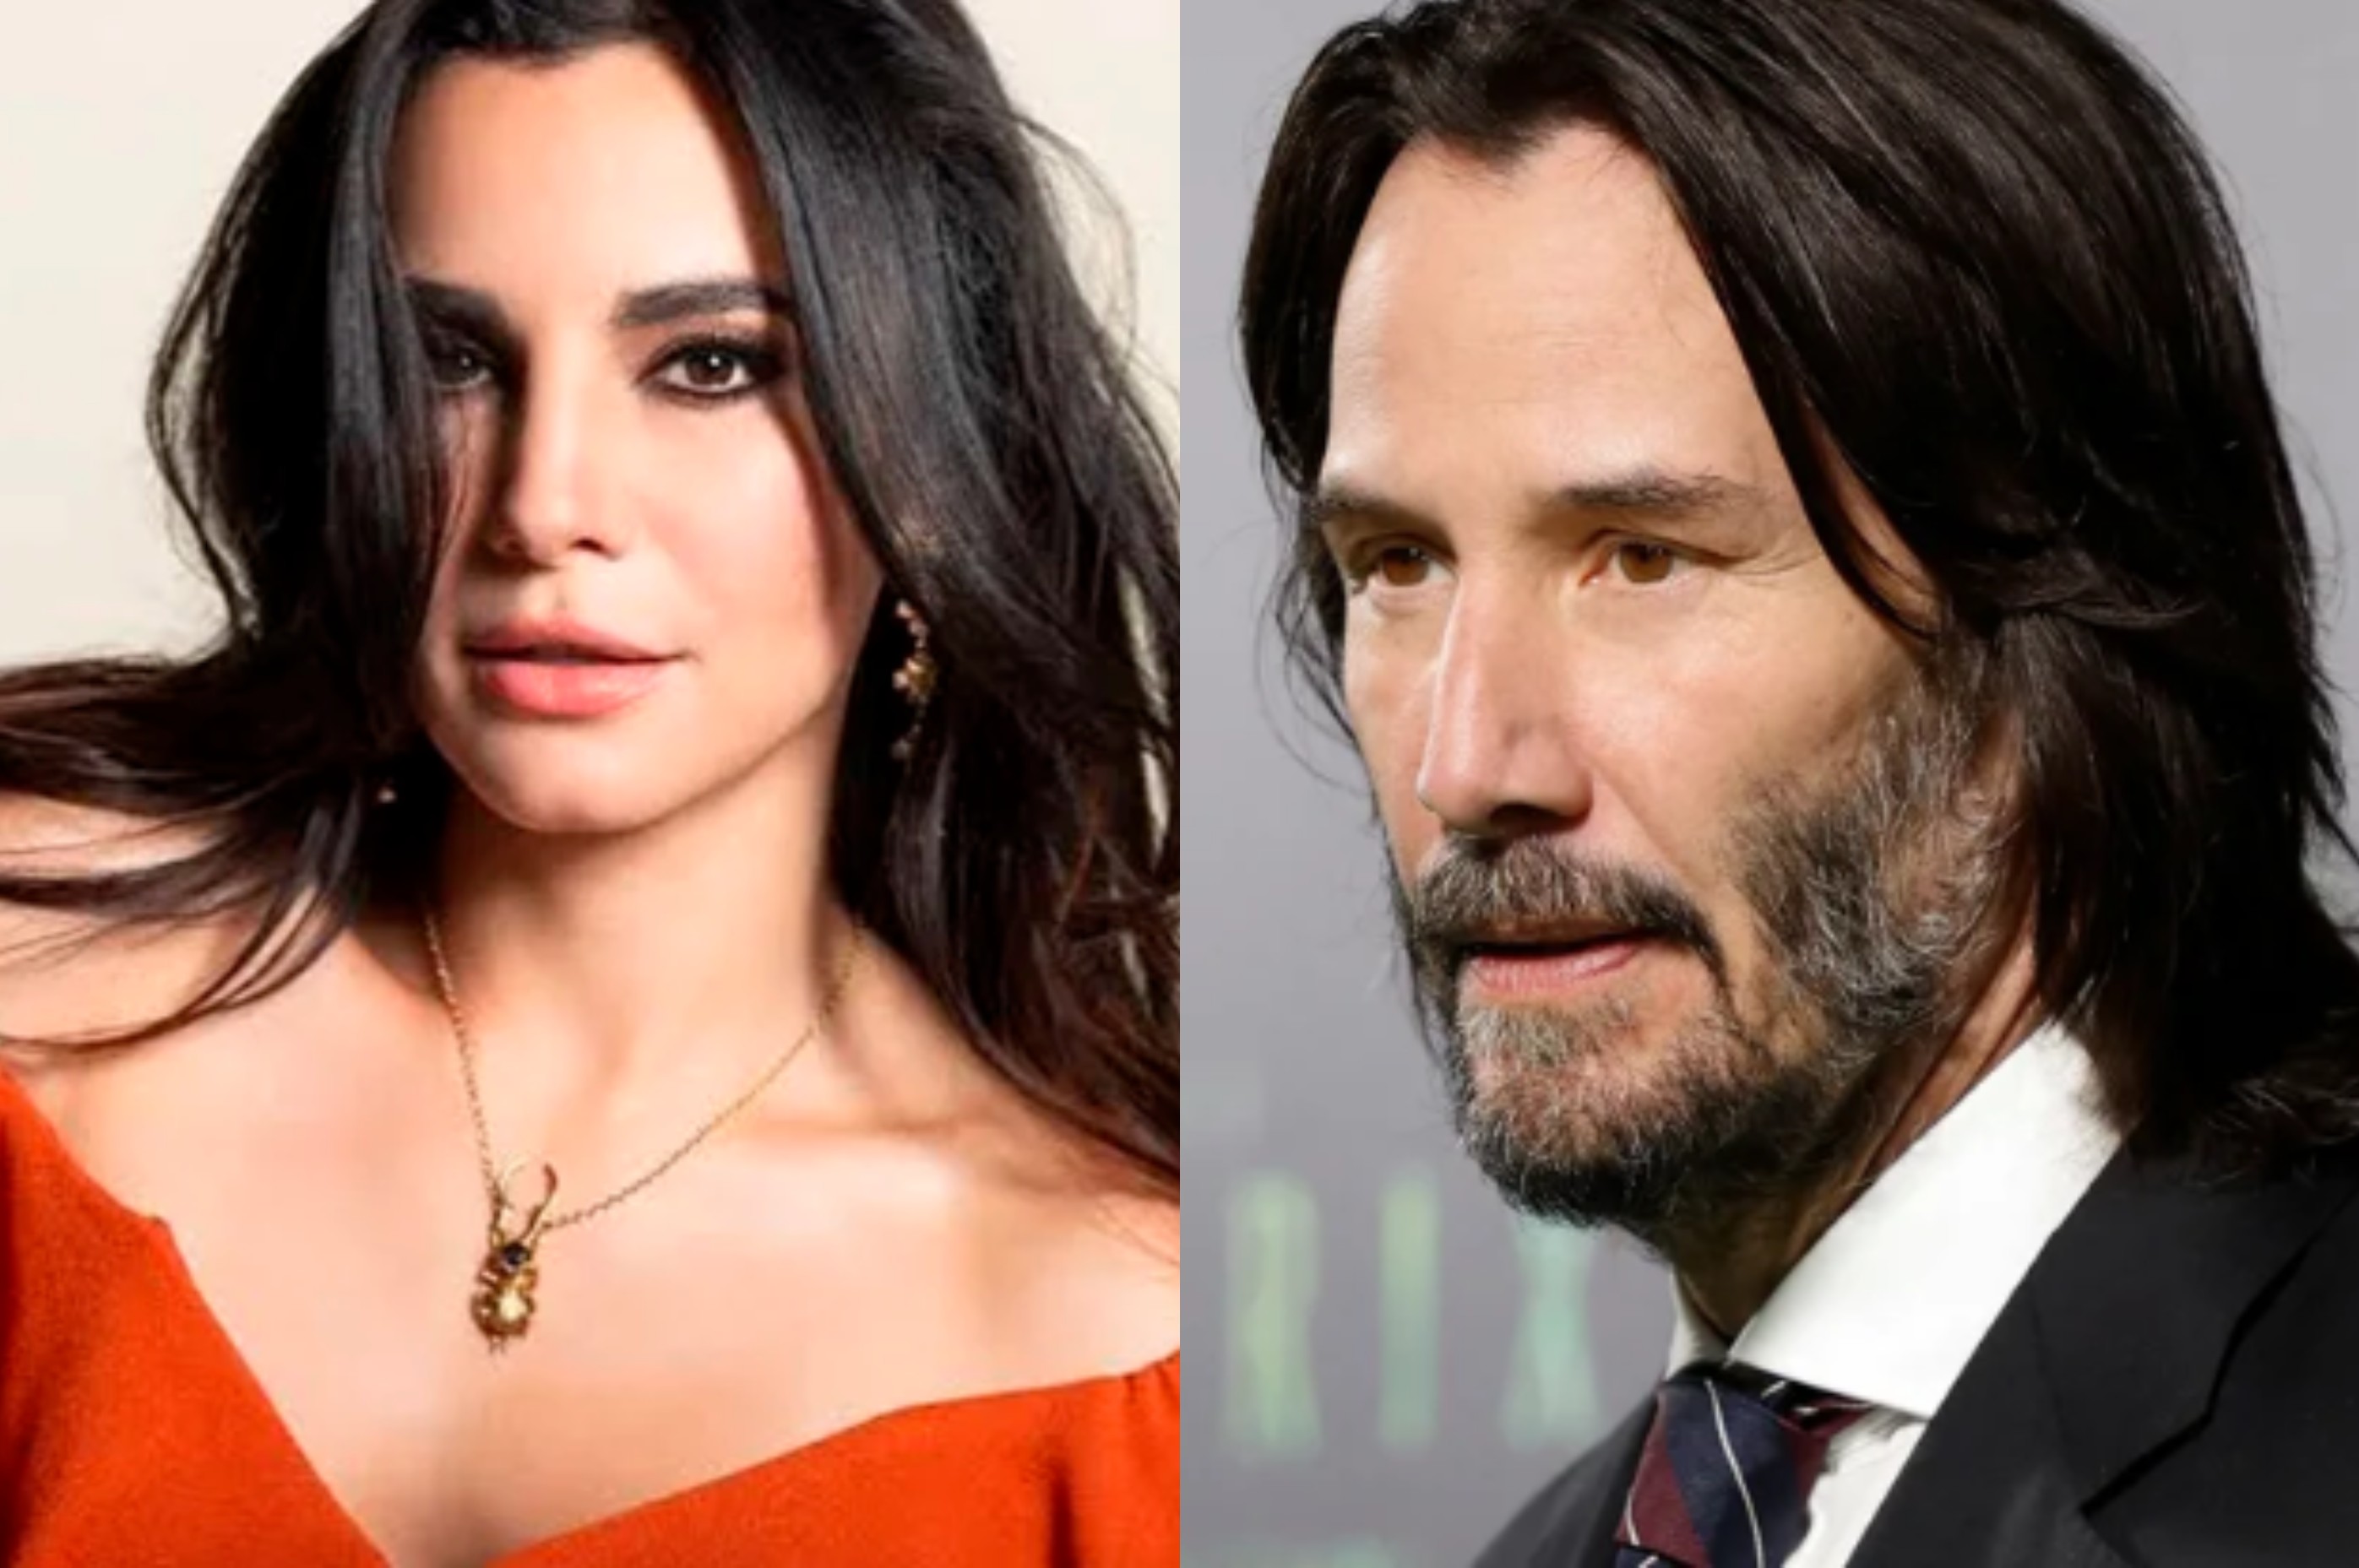 Martha Higadera recalled what it was like to work with Keanu Reeves Photo: Special/REUTERS/Instagram/@marthahigaredaoficial/